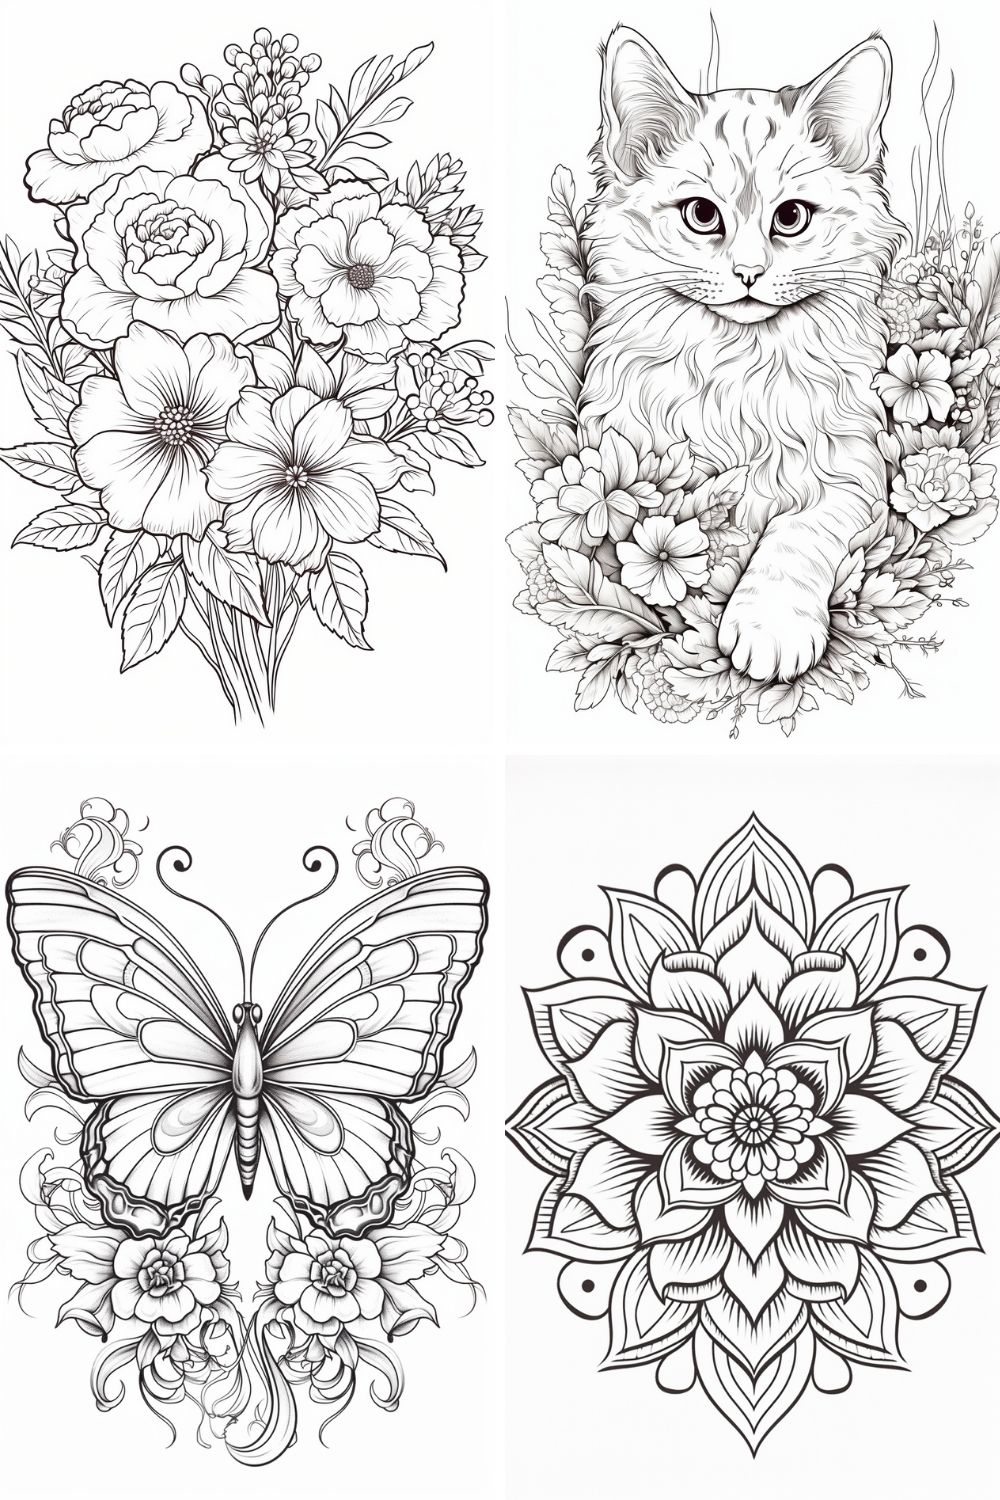 COLORING BOOK PAGES - Best Creative Unique Midjourney Prompt Ideas To Spark Your Creativity - Sprinkle of AI Image Prompt Set 3